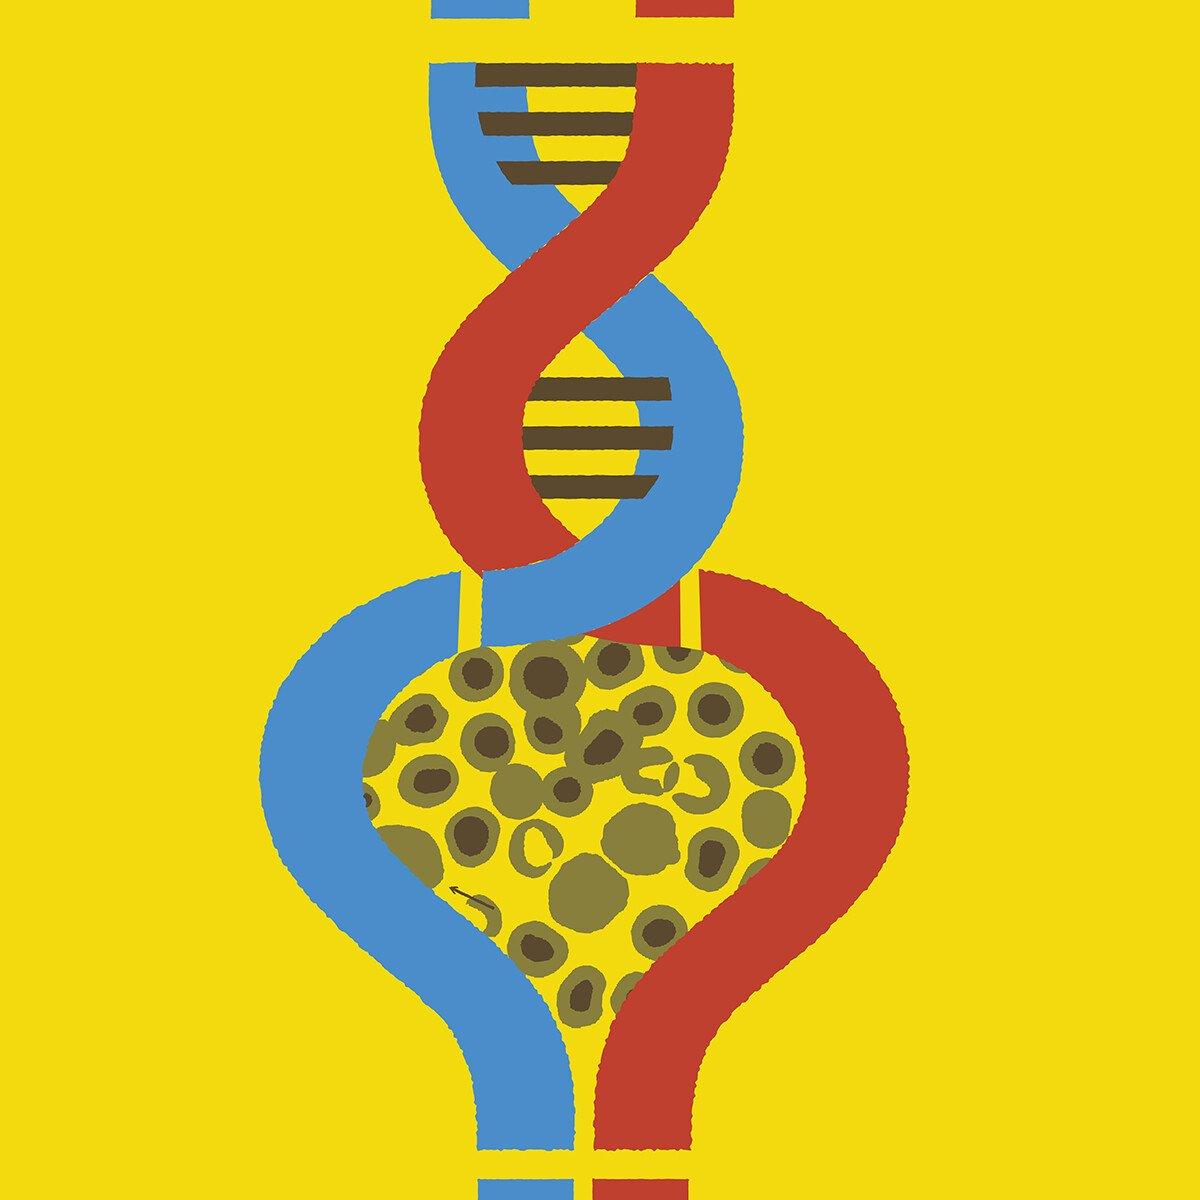 Illustration showing question marks around DNA